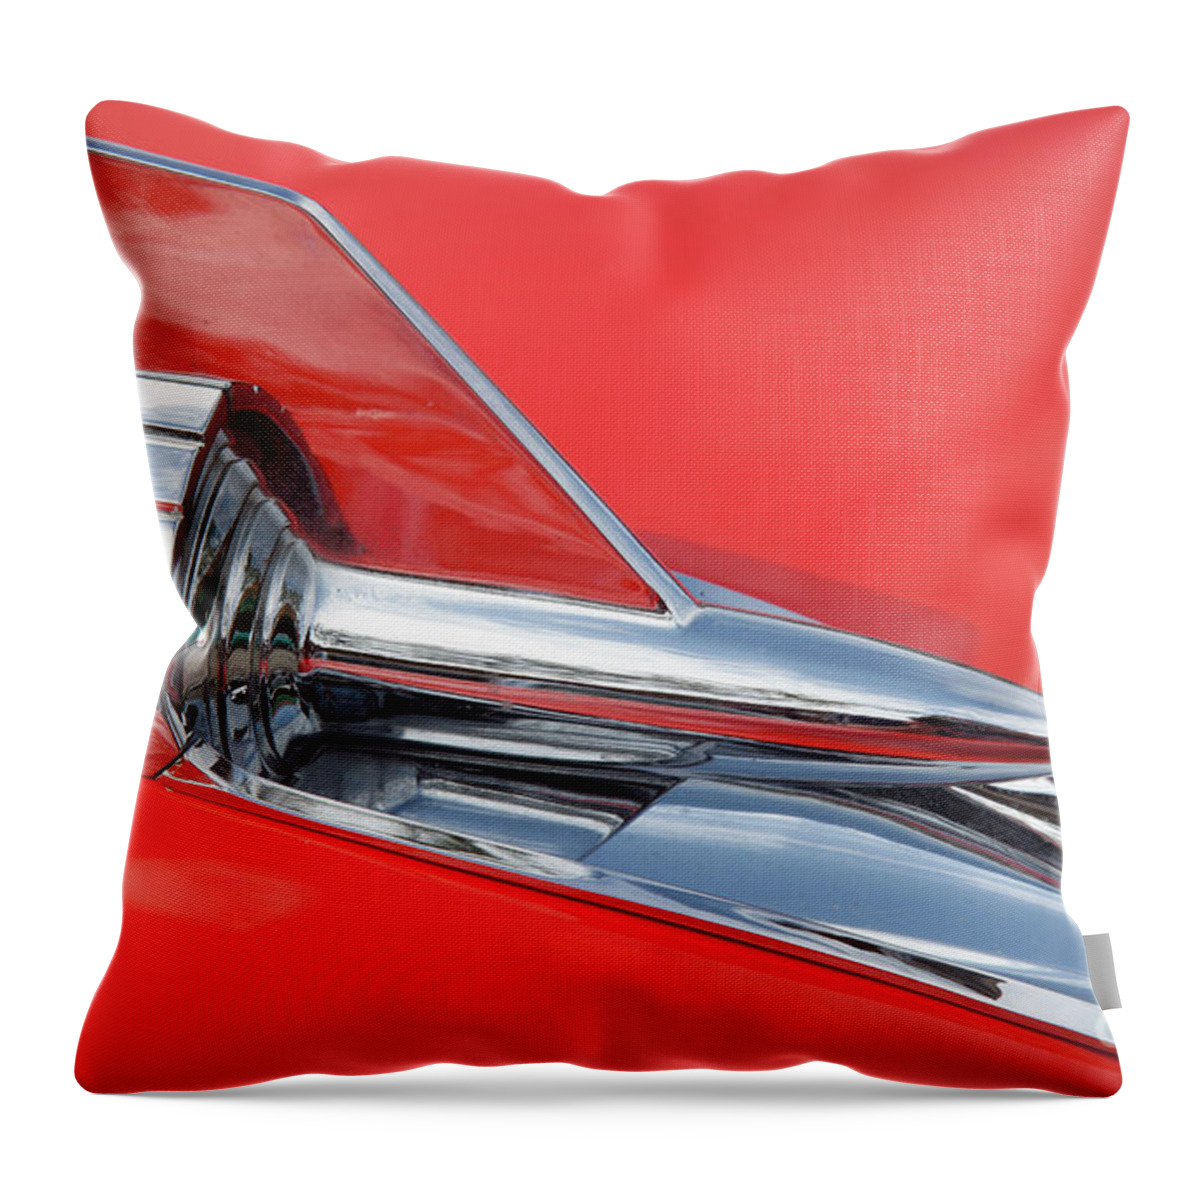 Classic Cars Throw Pillow featuring the photograph Cars_0950 by James Baron